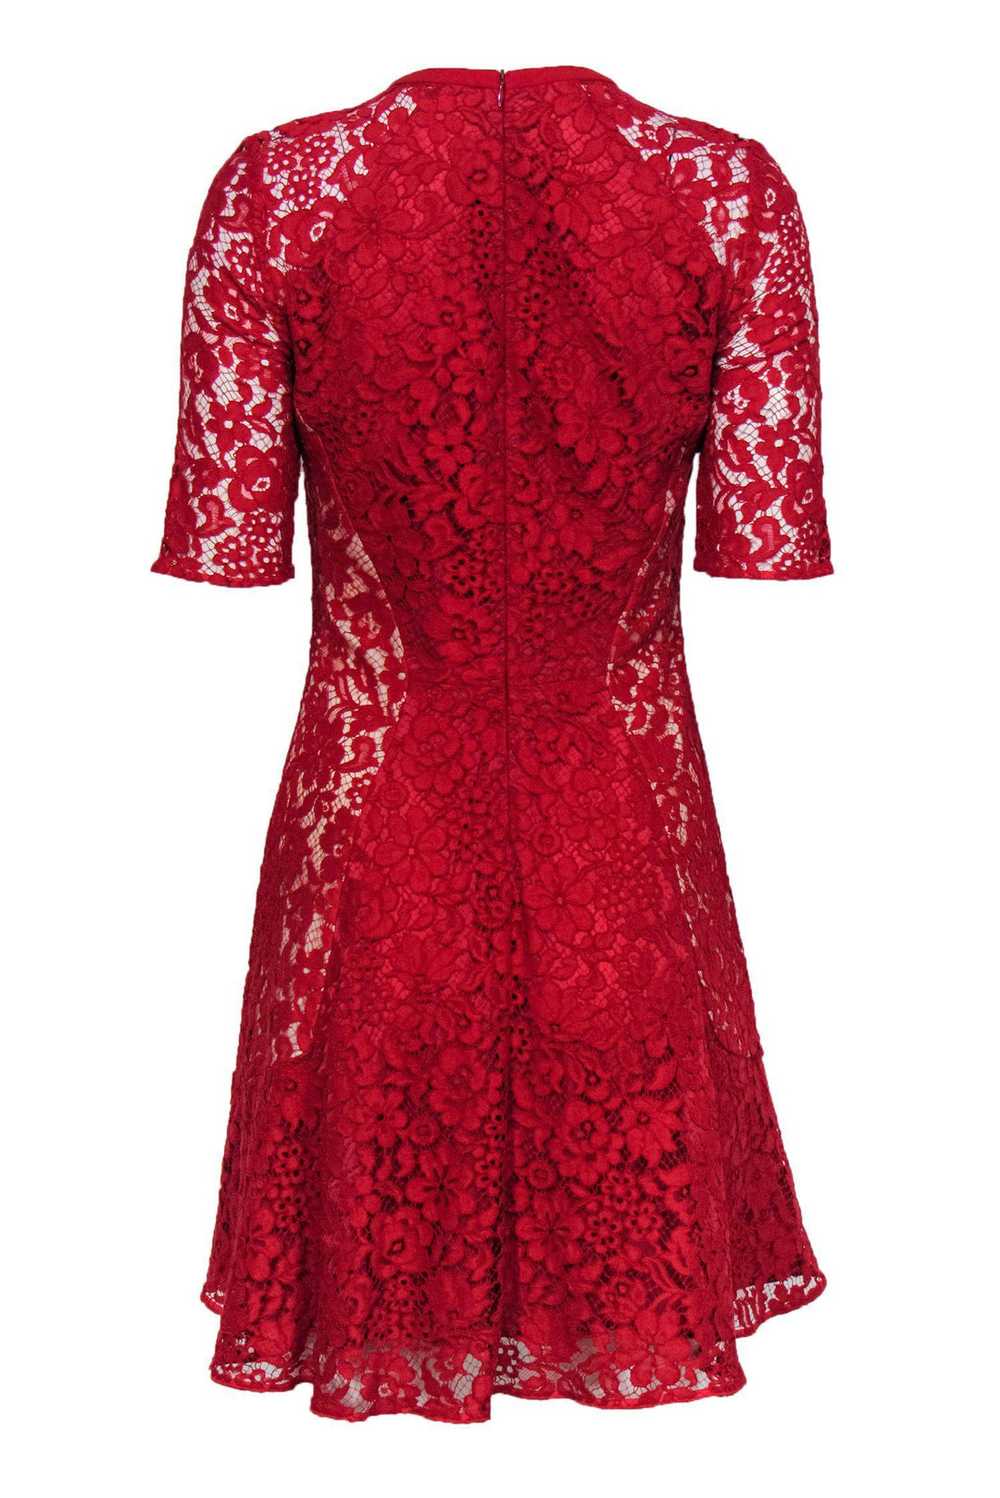 Joseph - Red Lace Cropped Sleeve Cocktail Dress S… - image 3